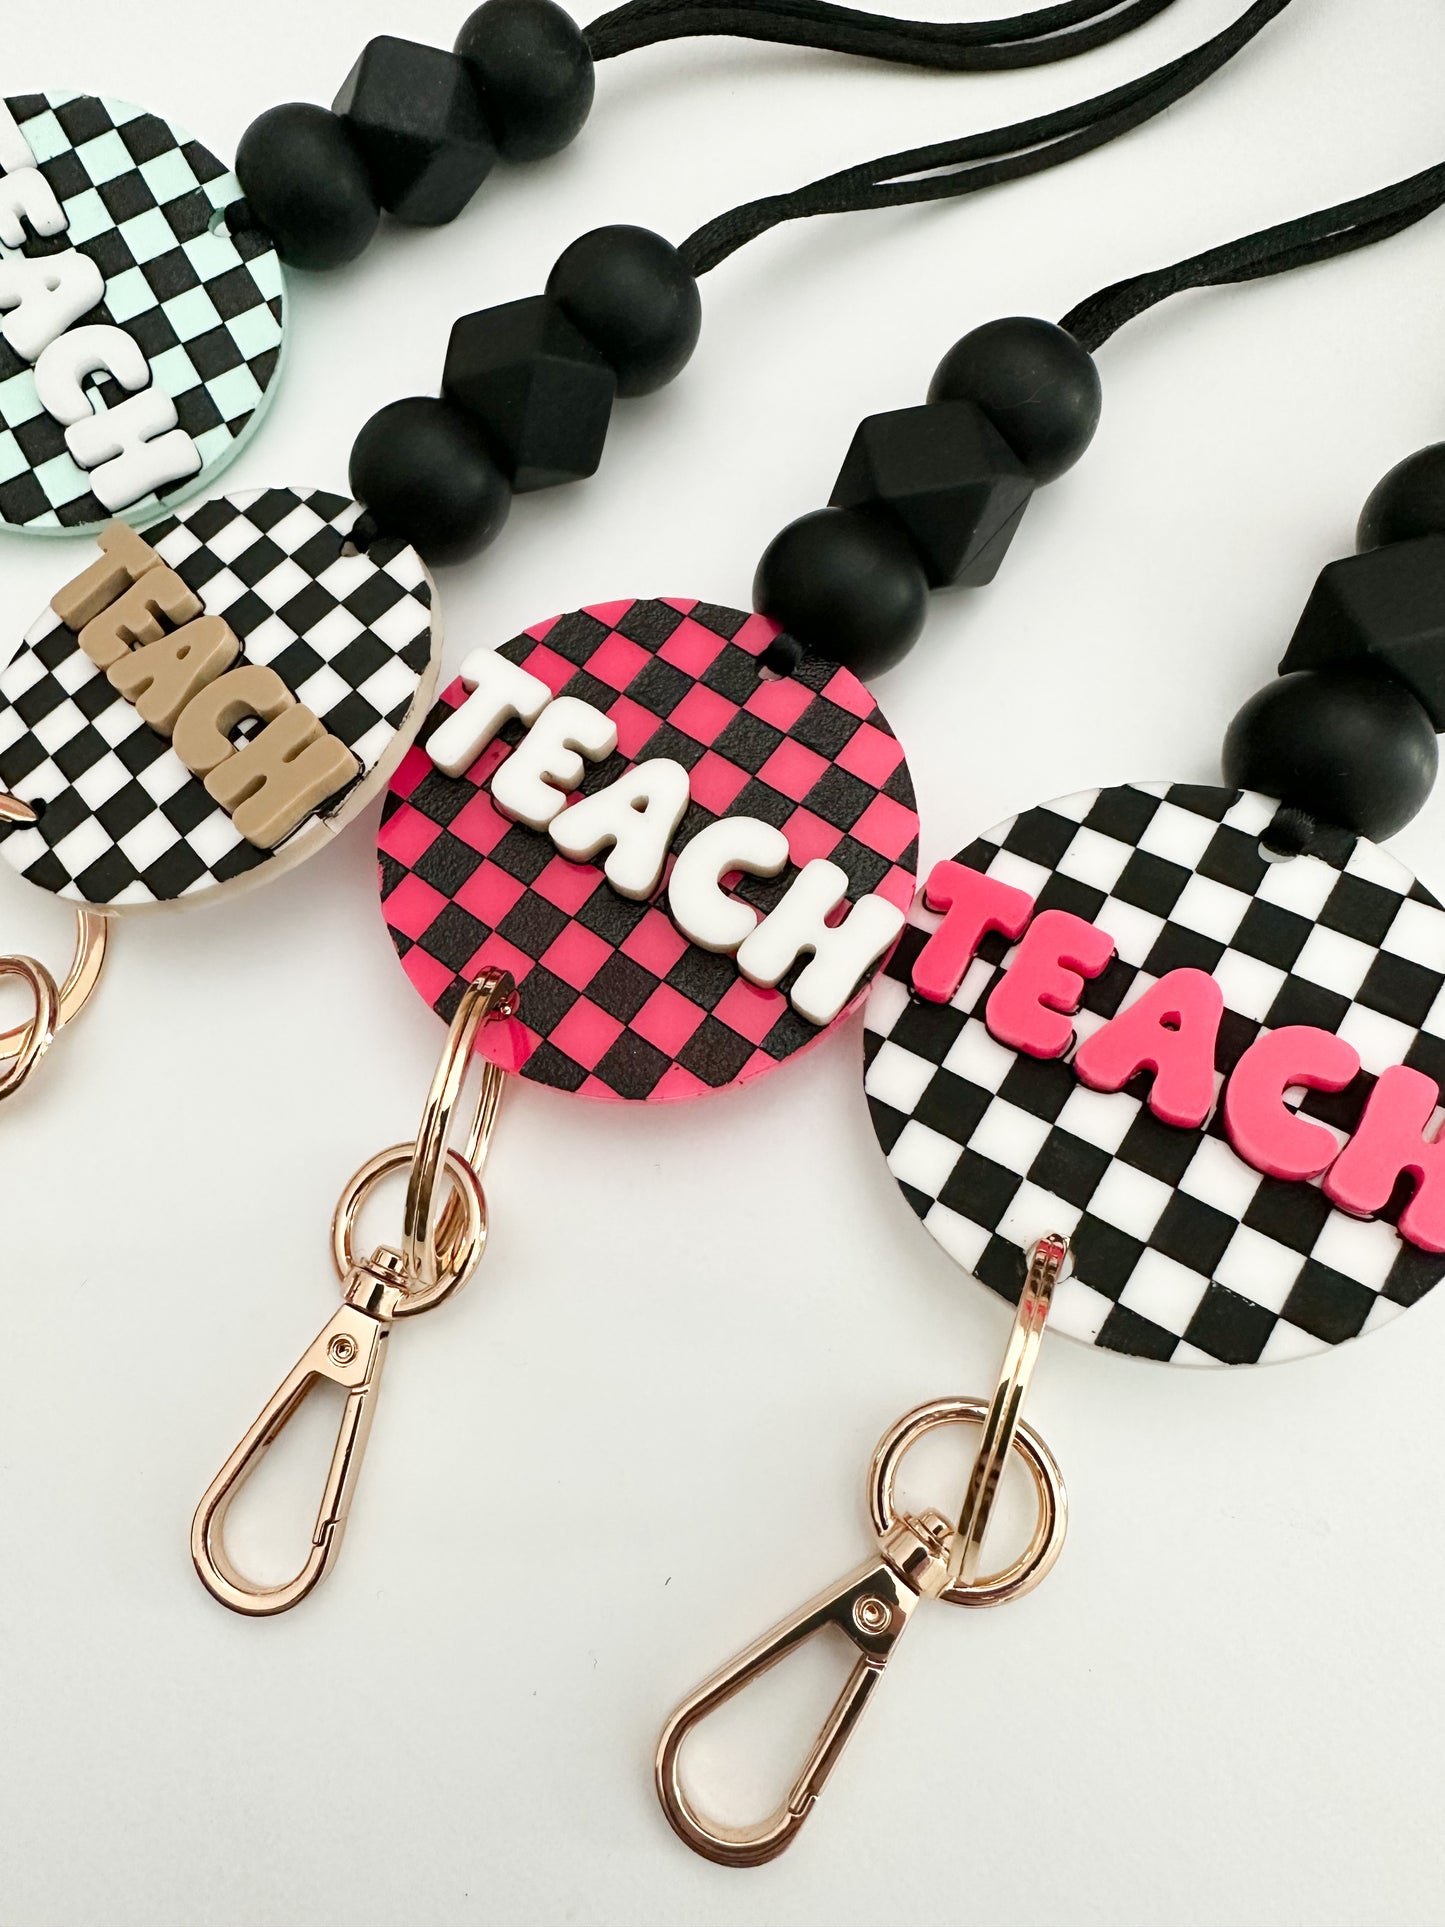 TEACH checkerboard lanyard (multiple color options)